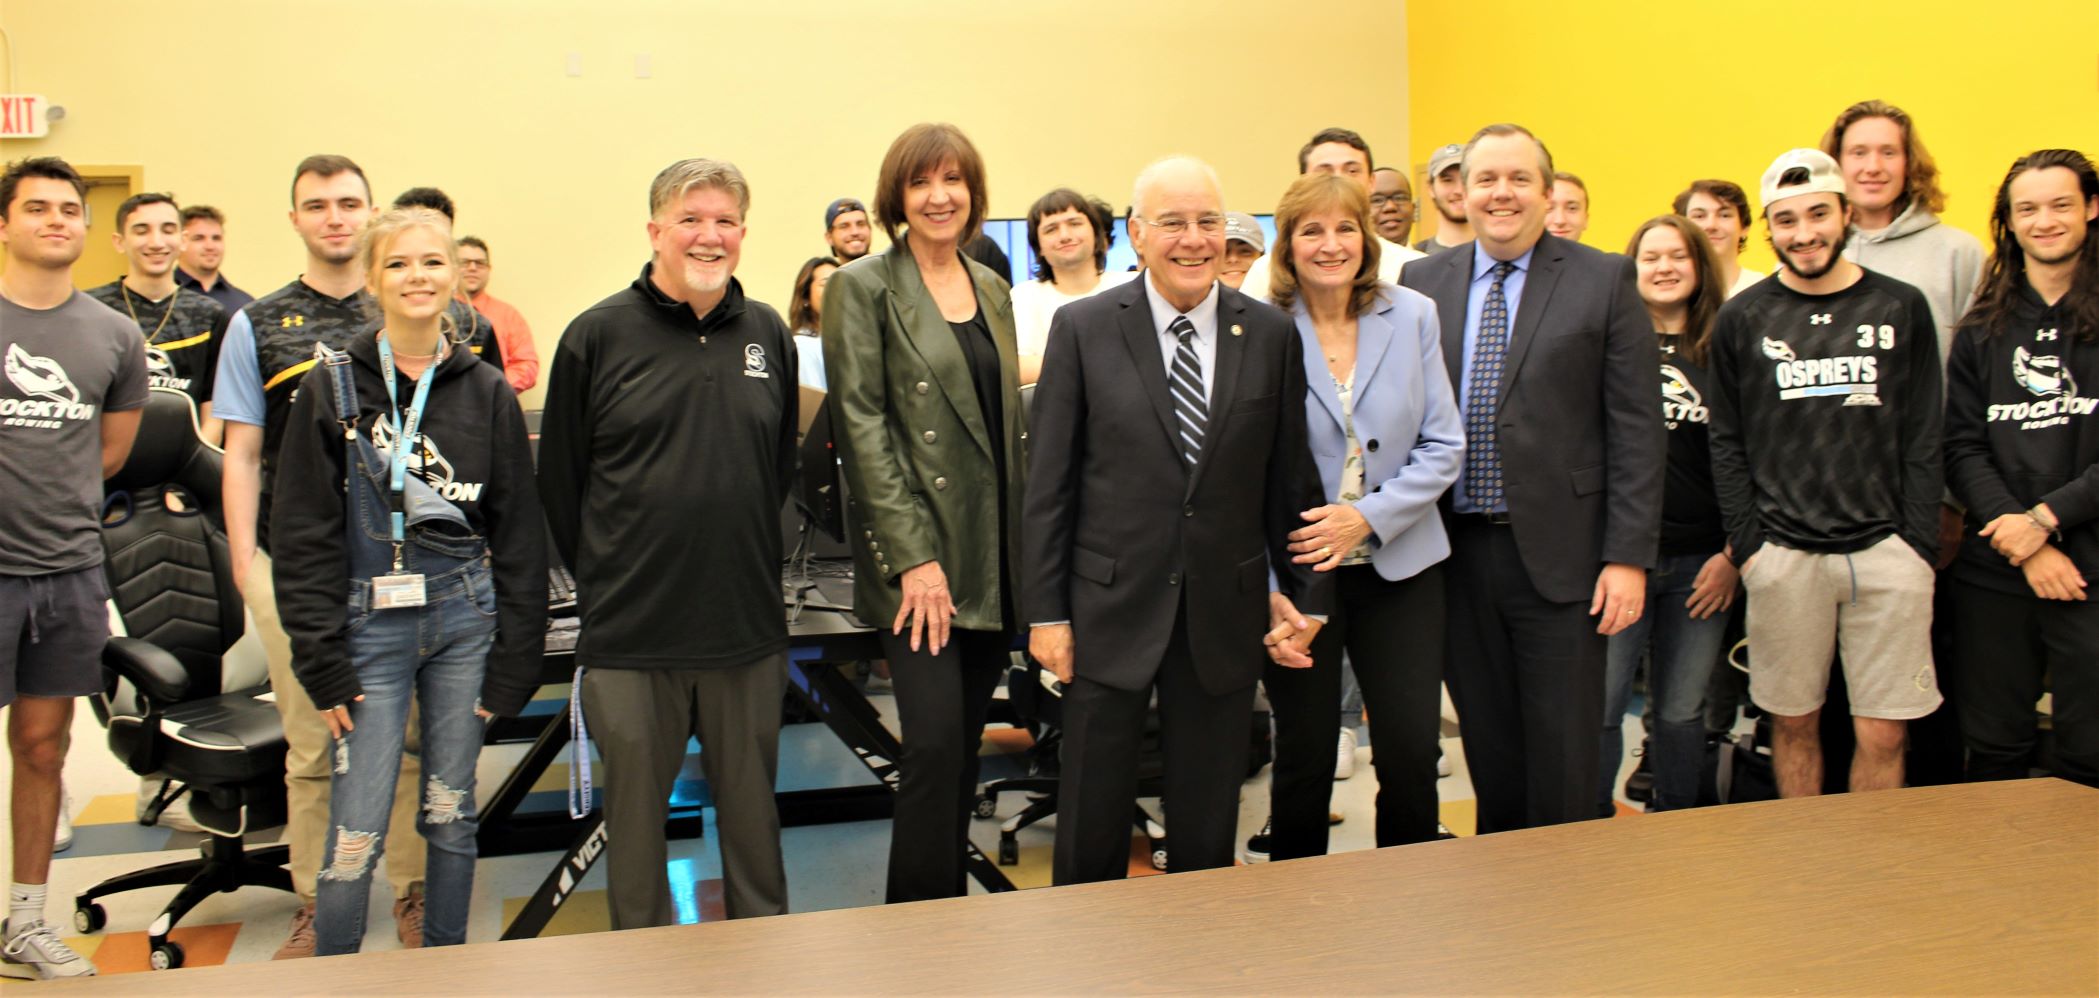 Stockton President Harvey Kesselman and Lynne Kesselman, center with members of Stockton’s club and intramural sports teams, Athletic Director Anthony Berich, Stockton Foundation Chair Donna Buzby and Chief Development Officer Dan Nugent.